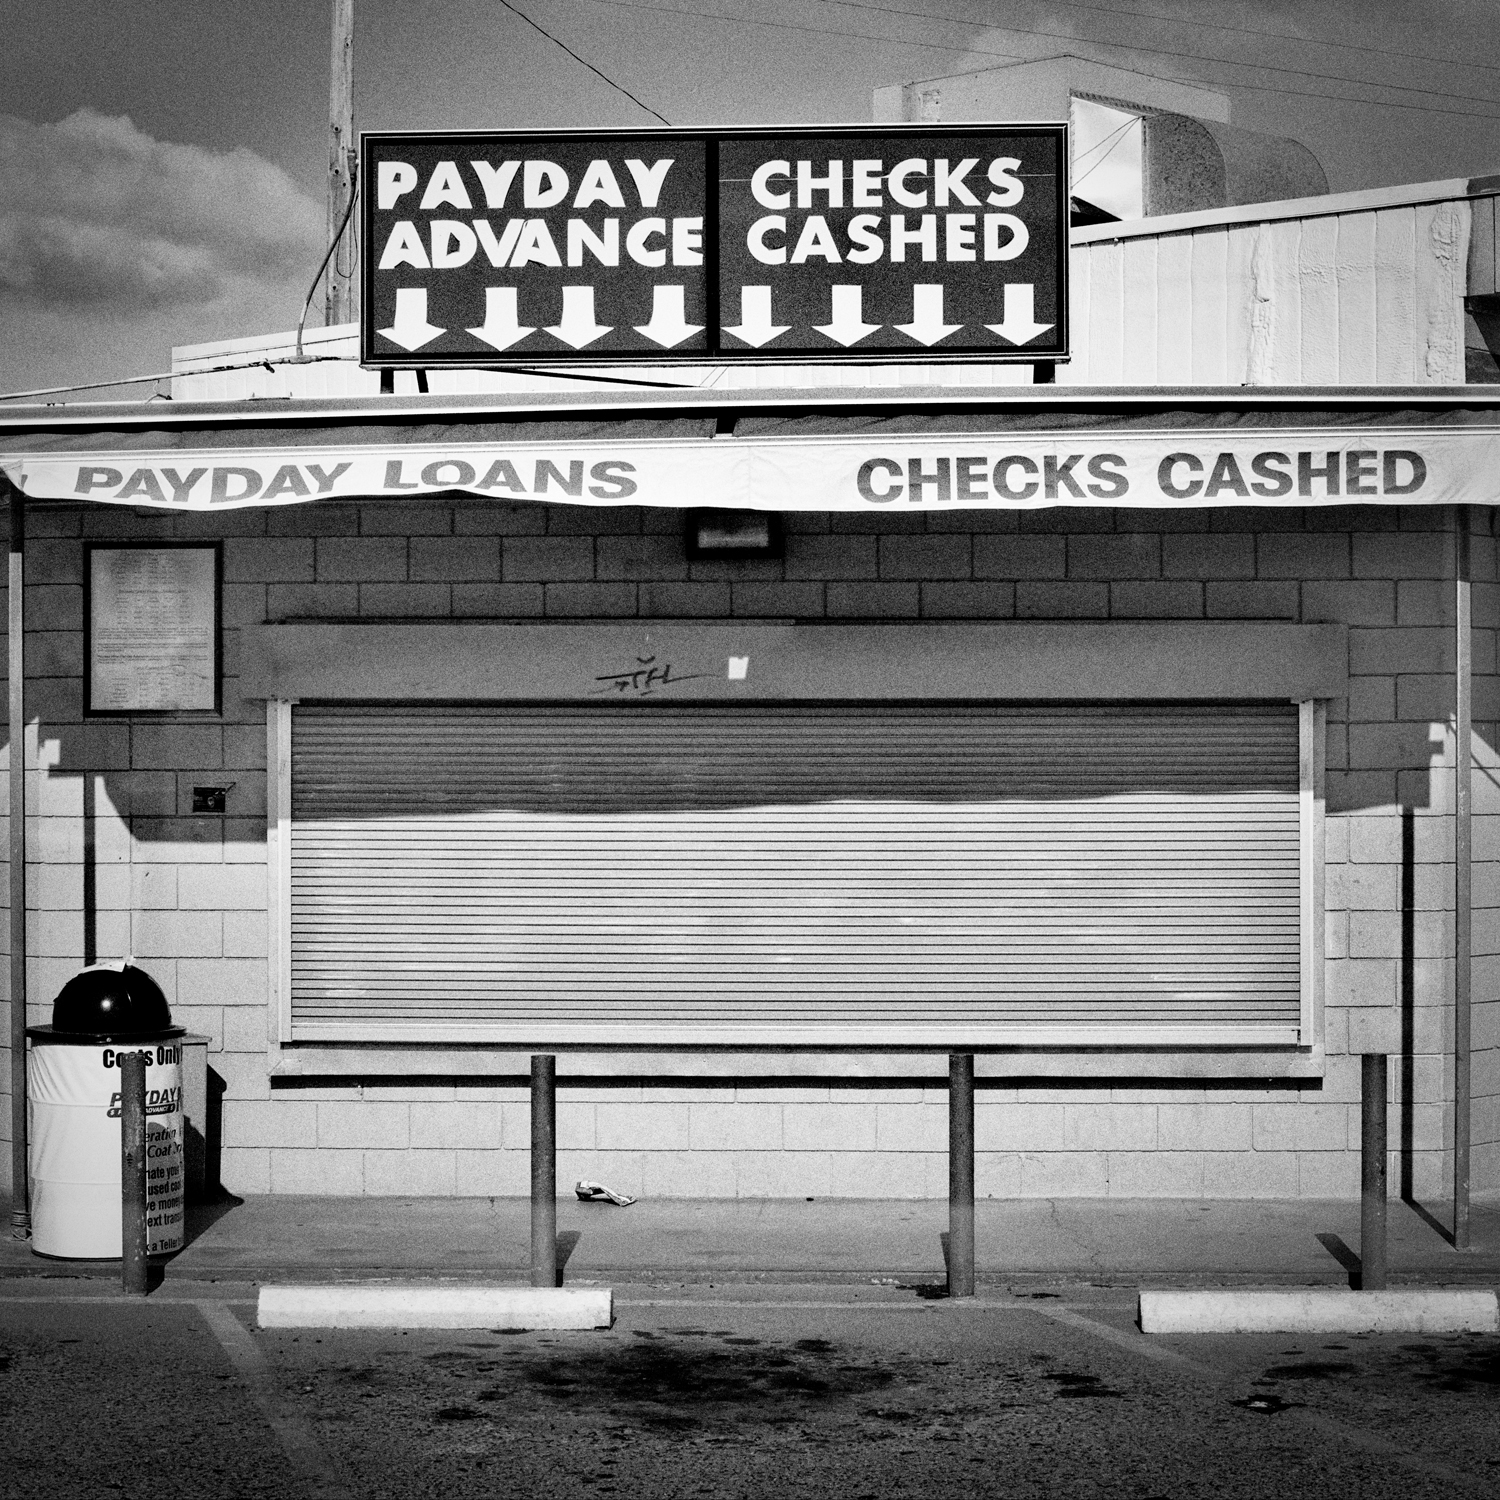 Payday lender. Fresno, CA. 36°44’45”N 119°46’19”W #geographyofpoverty
                              
                              Fresno is a city in Fresno County, California, United States. The population was 494,665 at the 2010 census. Residents have a per capita income of $19,752 and 24.8% live below the poverty level.  In 2006, Fresno was found to have the highest rates of concentrated poverty in the nation.  Fresno County is the richest agricultural county in the United States, producing over $6 billion in crops annually.